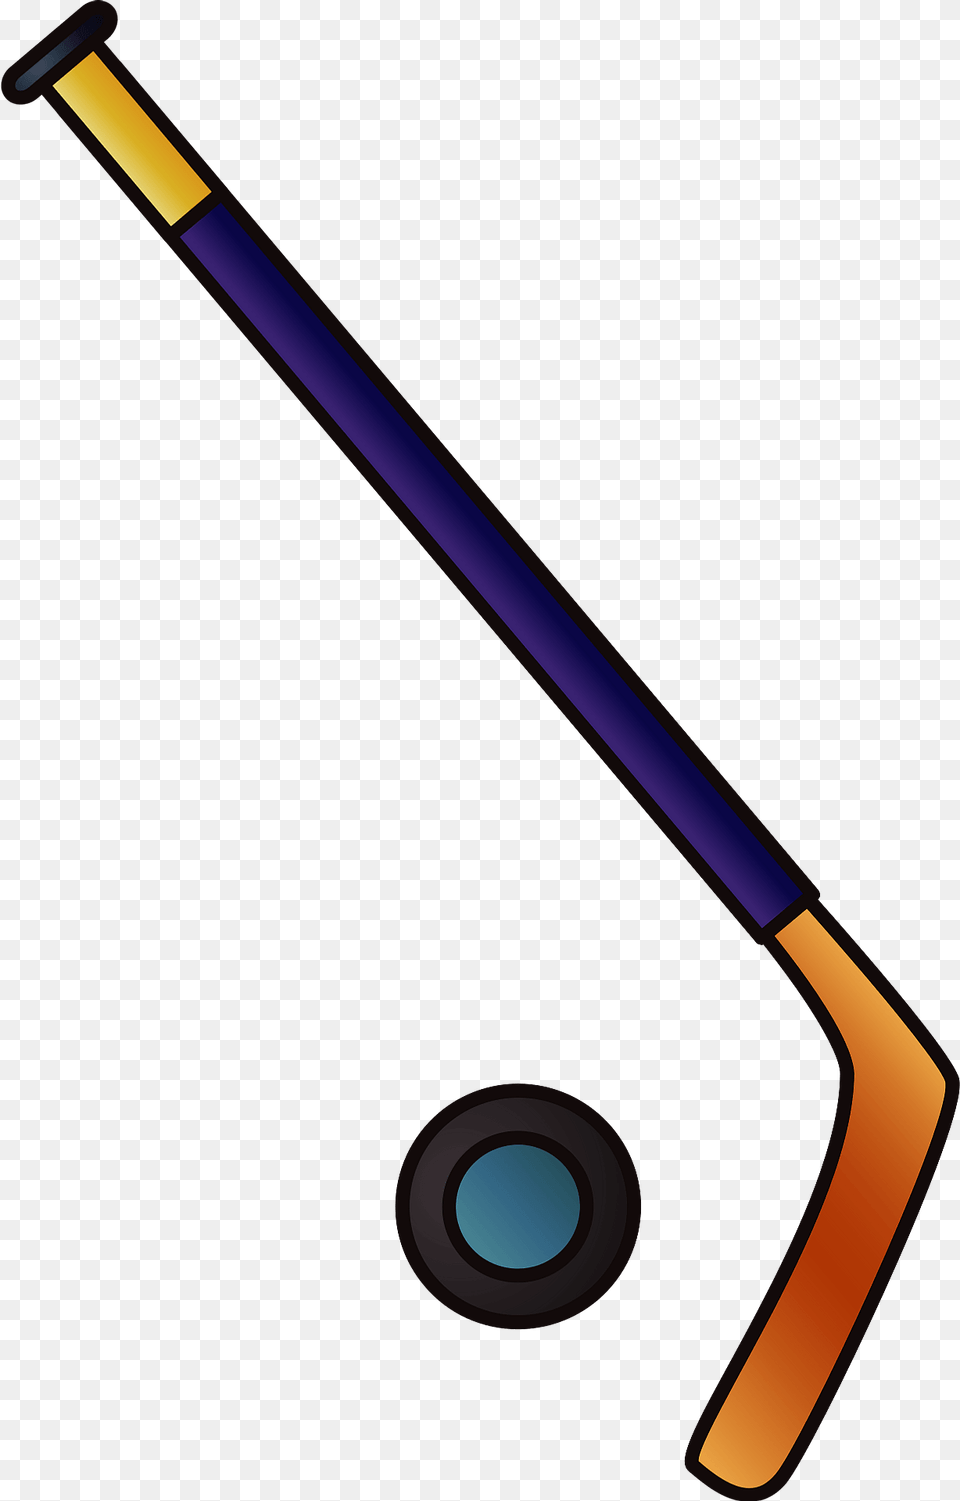 Ice Hockey Stick And Puck Clipart, Smoke Pipe, Cane Png